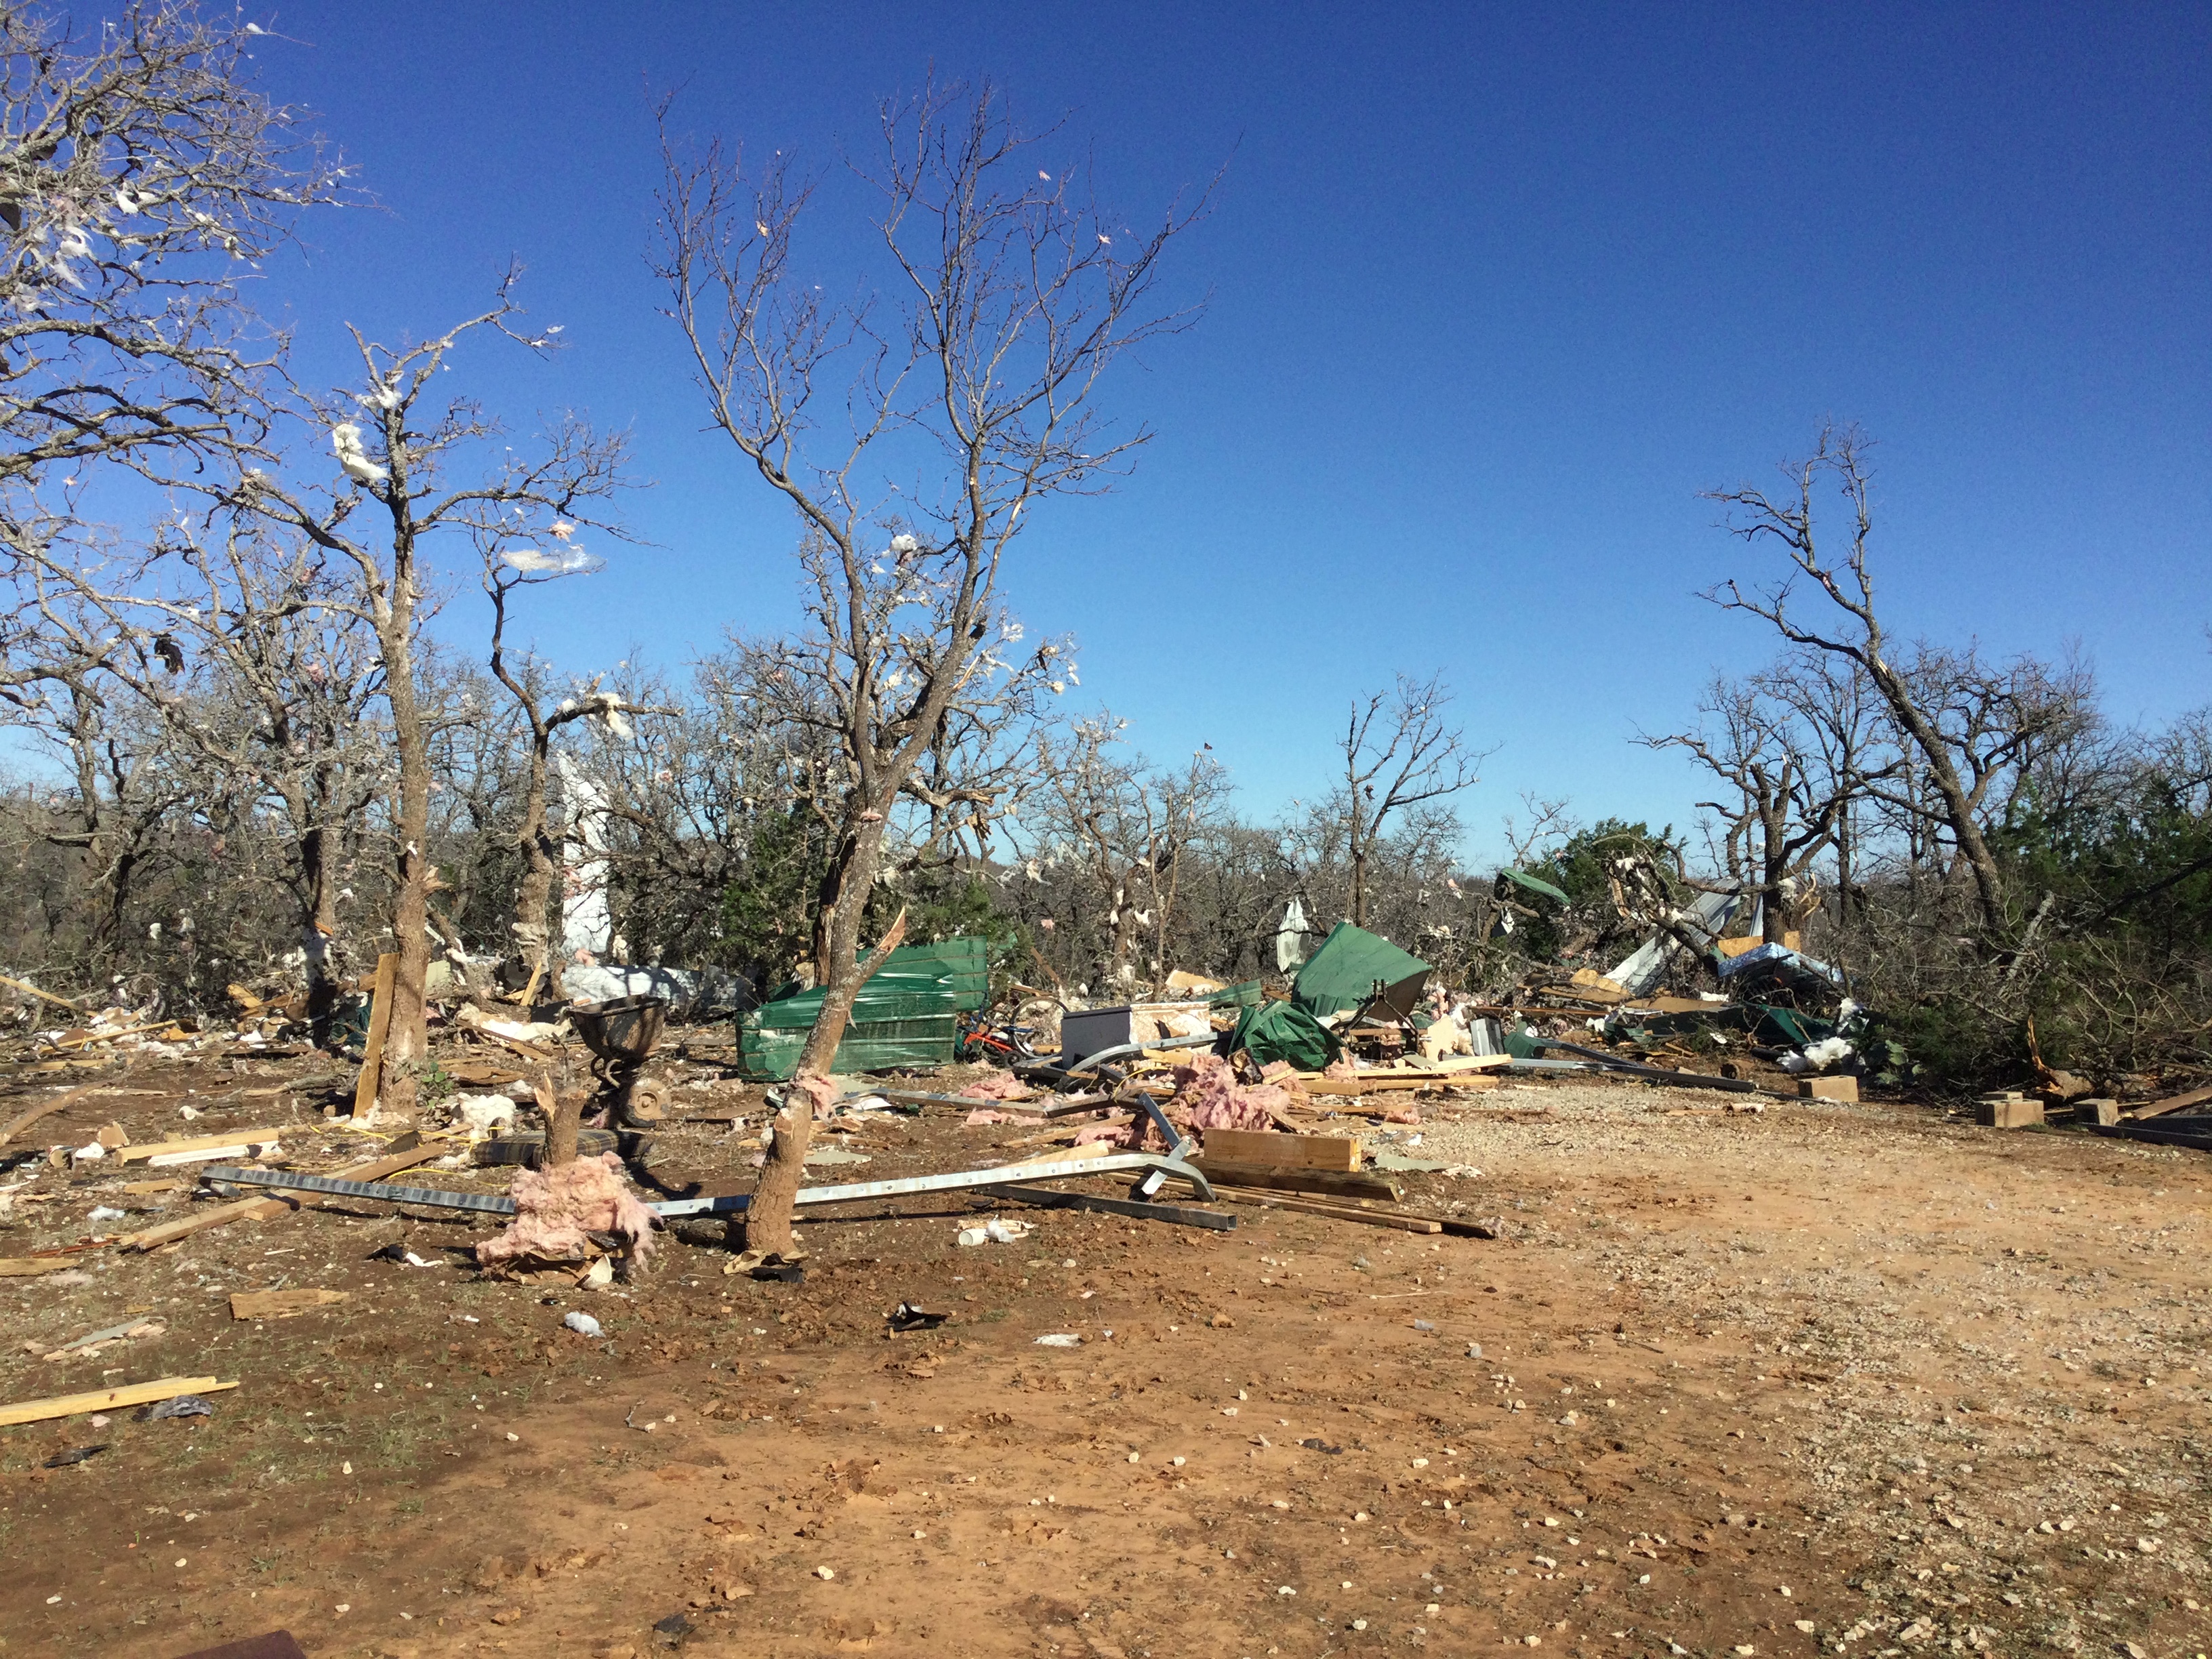 A carport that was destroyed at high-end EF2 intensity in Eastland County, Texas north of Gorman, Texas.